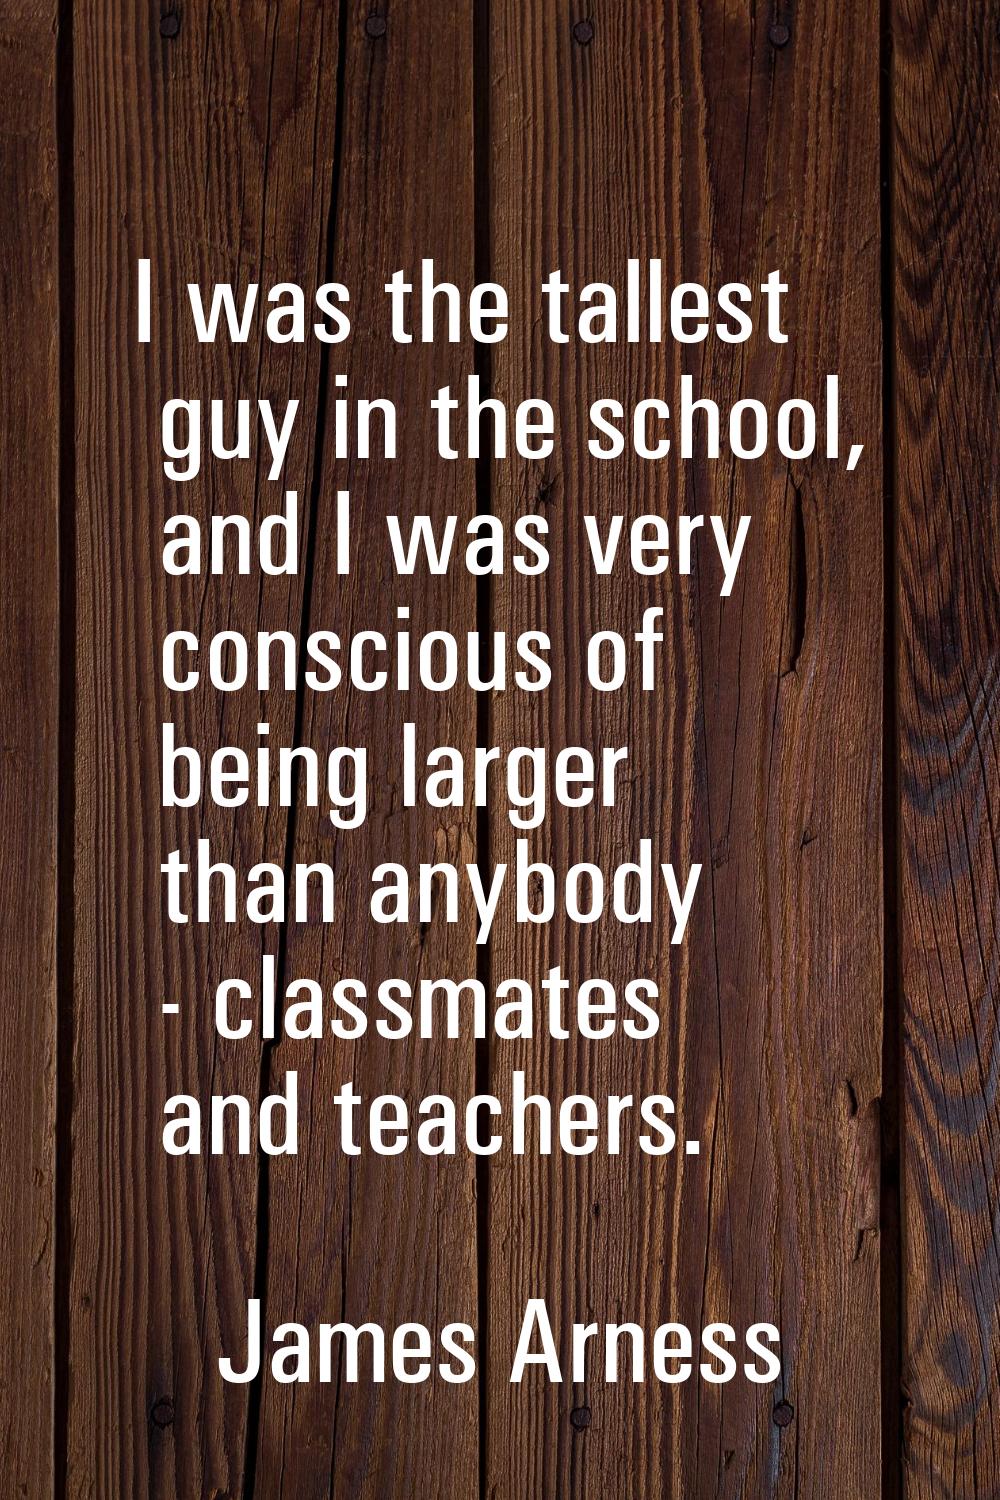 I was the tallest guy in the school, and I was very conscious of being larger than anybody - classm